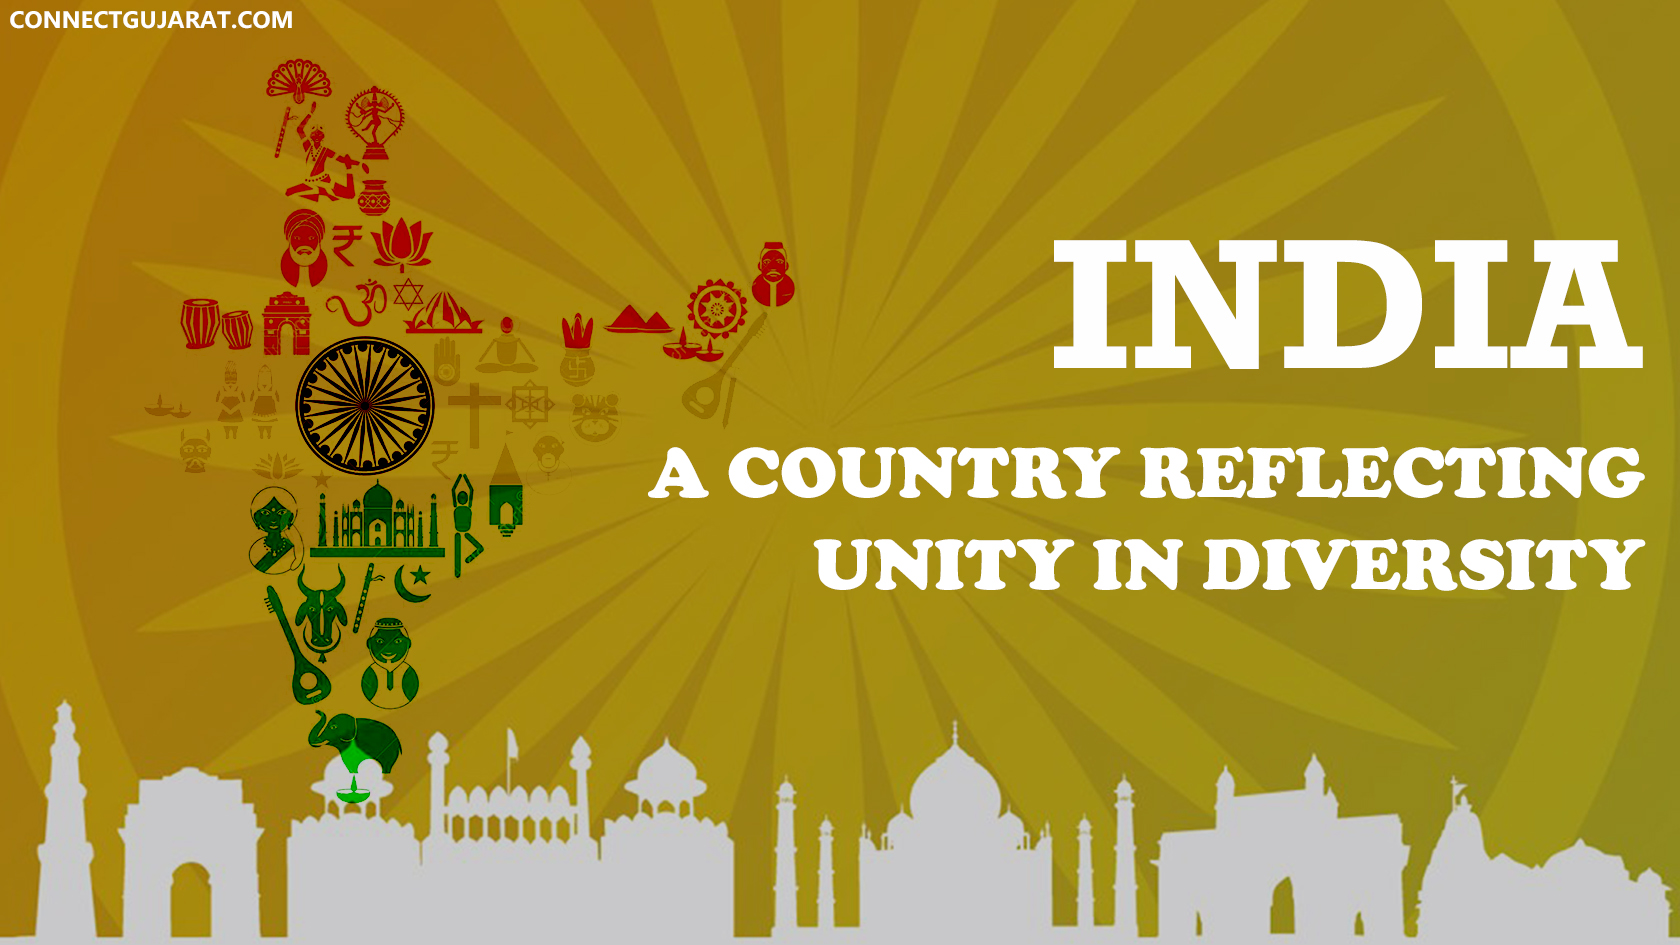 india is a country of unity in diversity